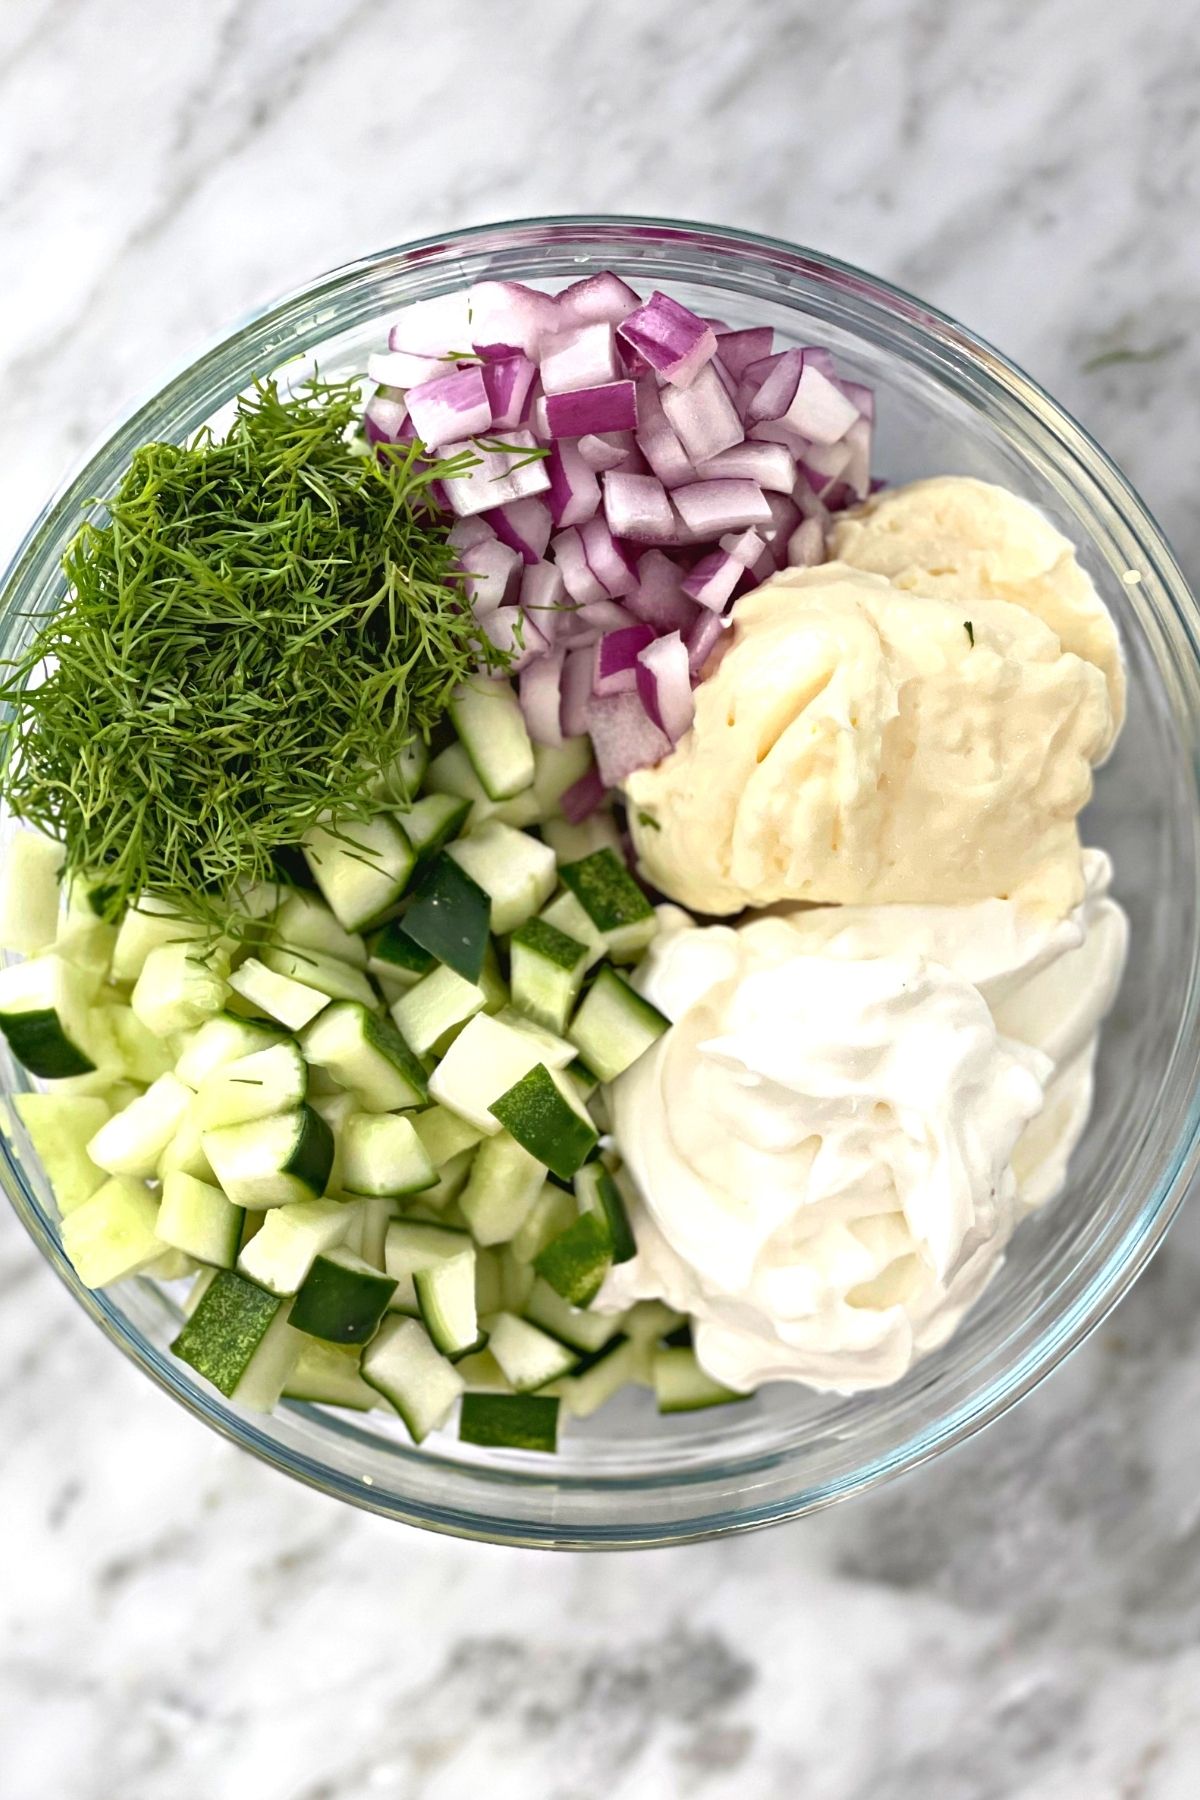 Creamy cucumber salad ingredients prepared and placed in a glass bowl ready to be mixed.